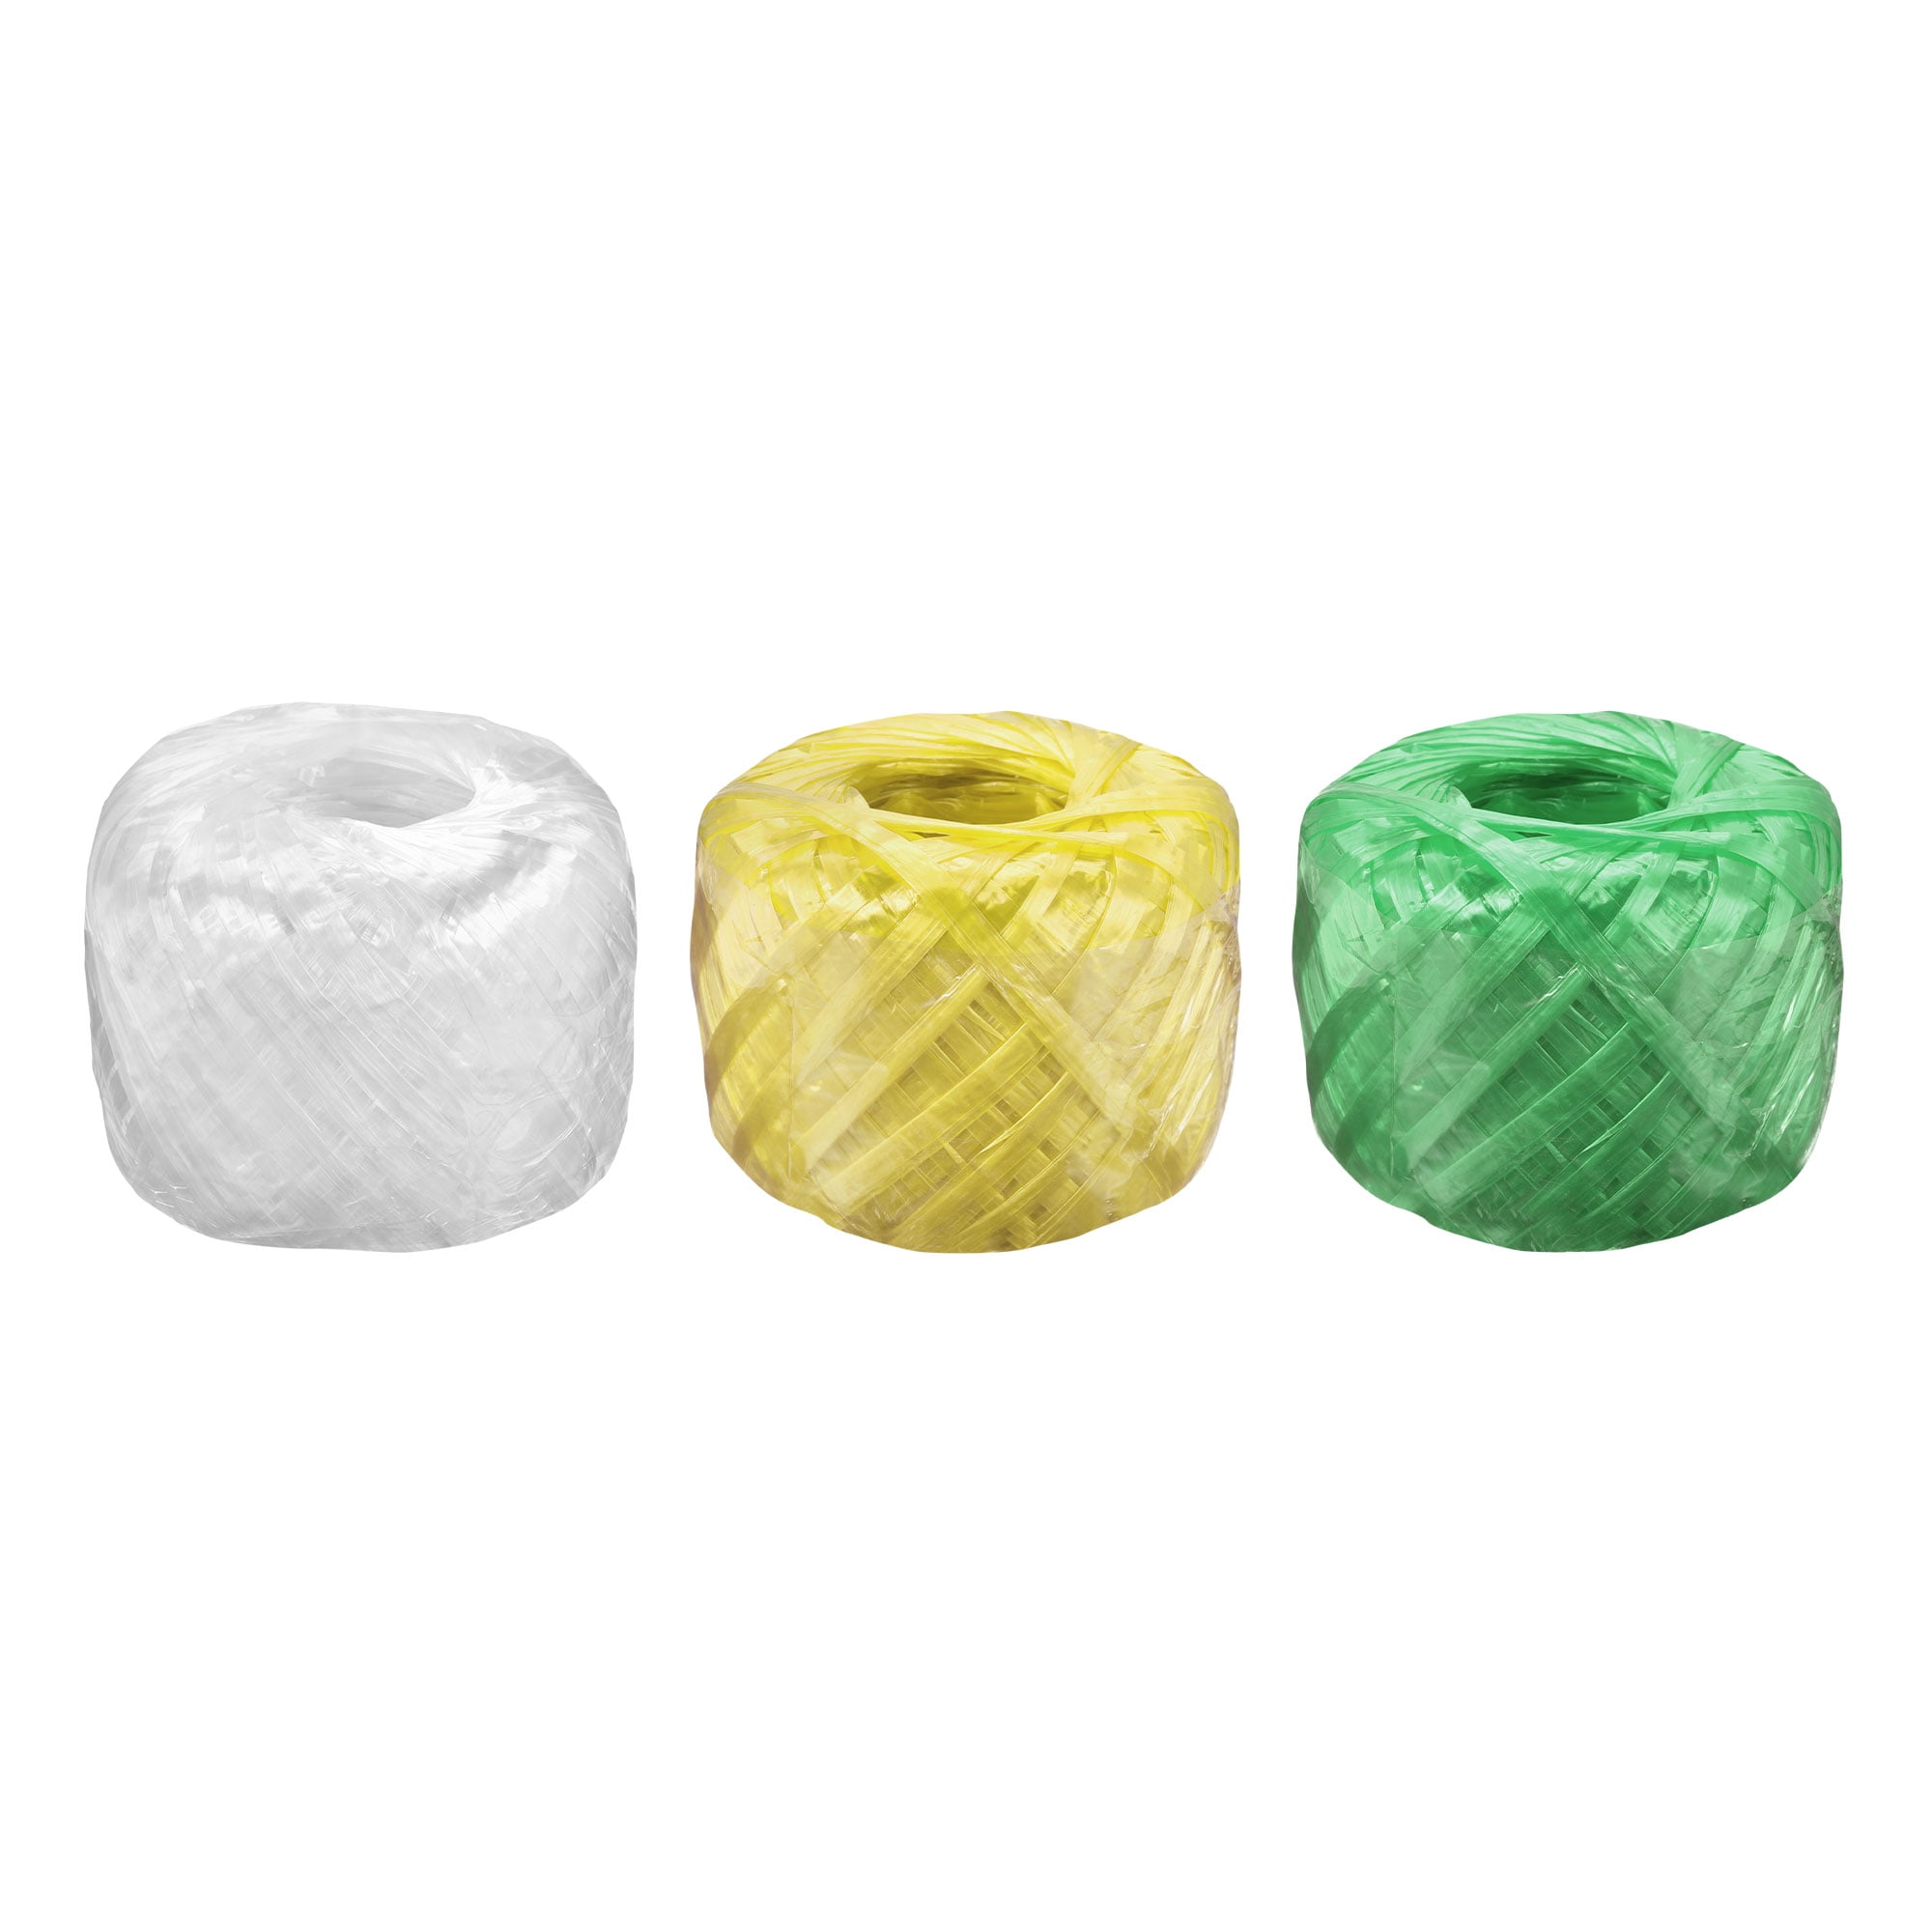 Uxcell Polyester Nylon Plastic Rope Twine Household Bundled for  Packing,100m Length,White Yellow Green,3 Rolls